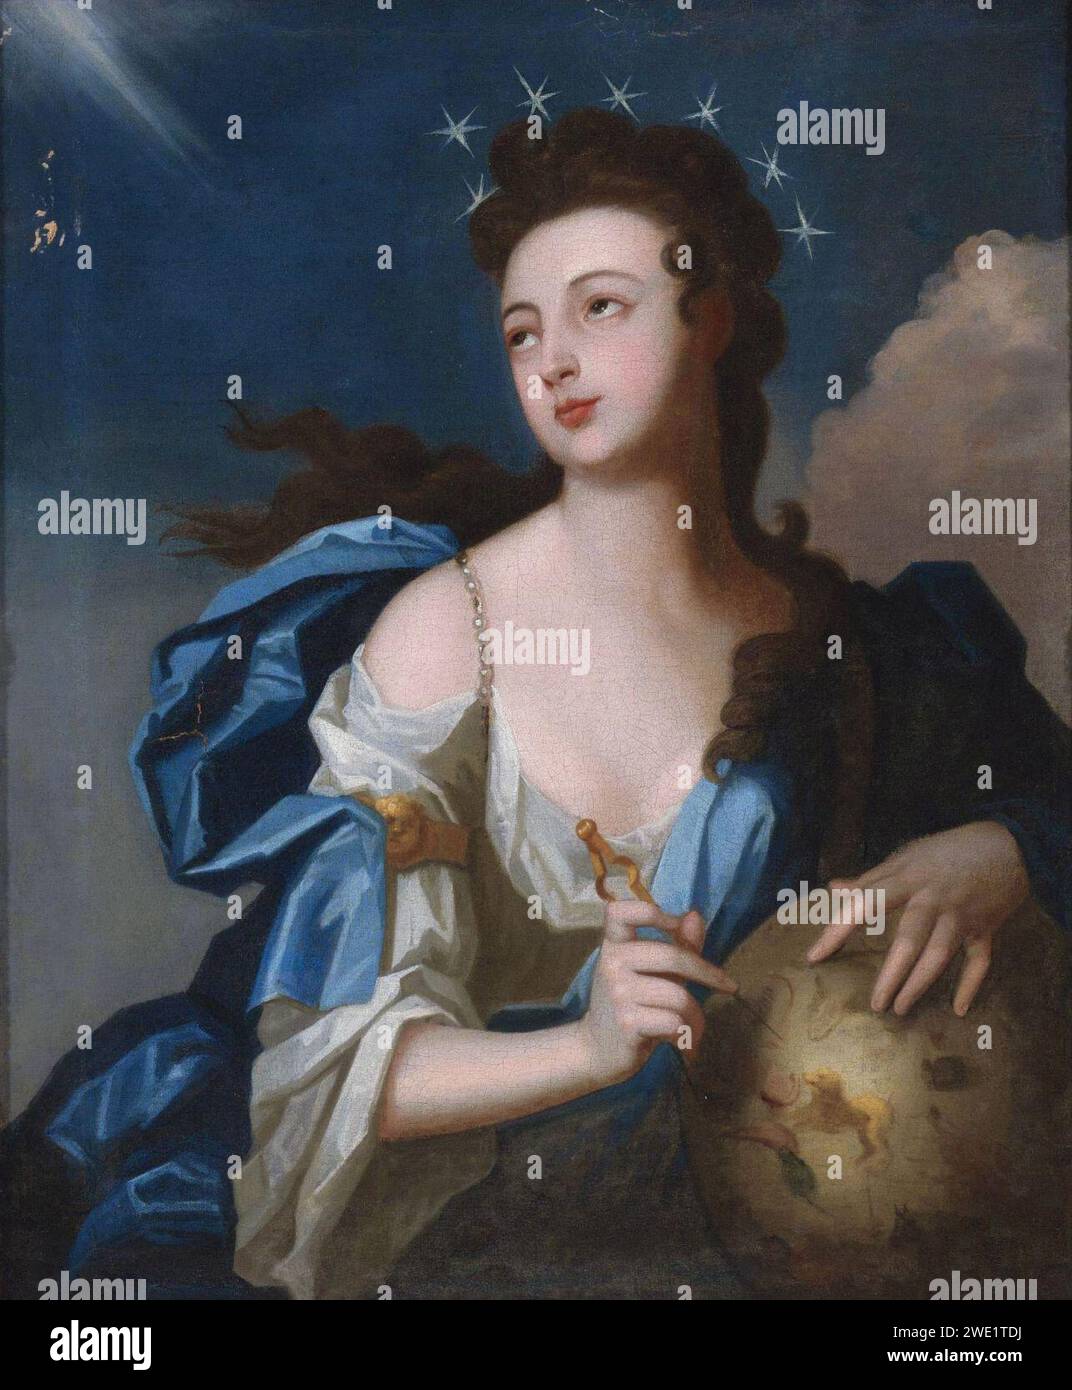 Allegorical Portrait of Urania, Muse of Astronomy by Louis Tocqué. Stock Photo